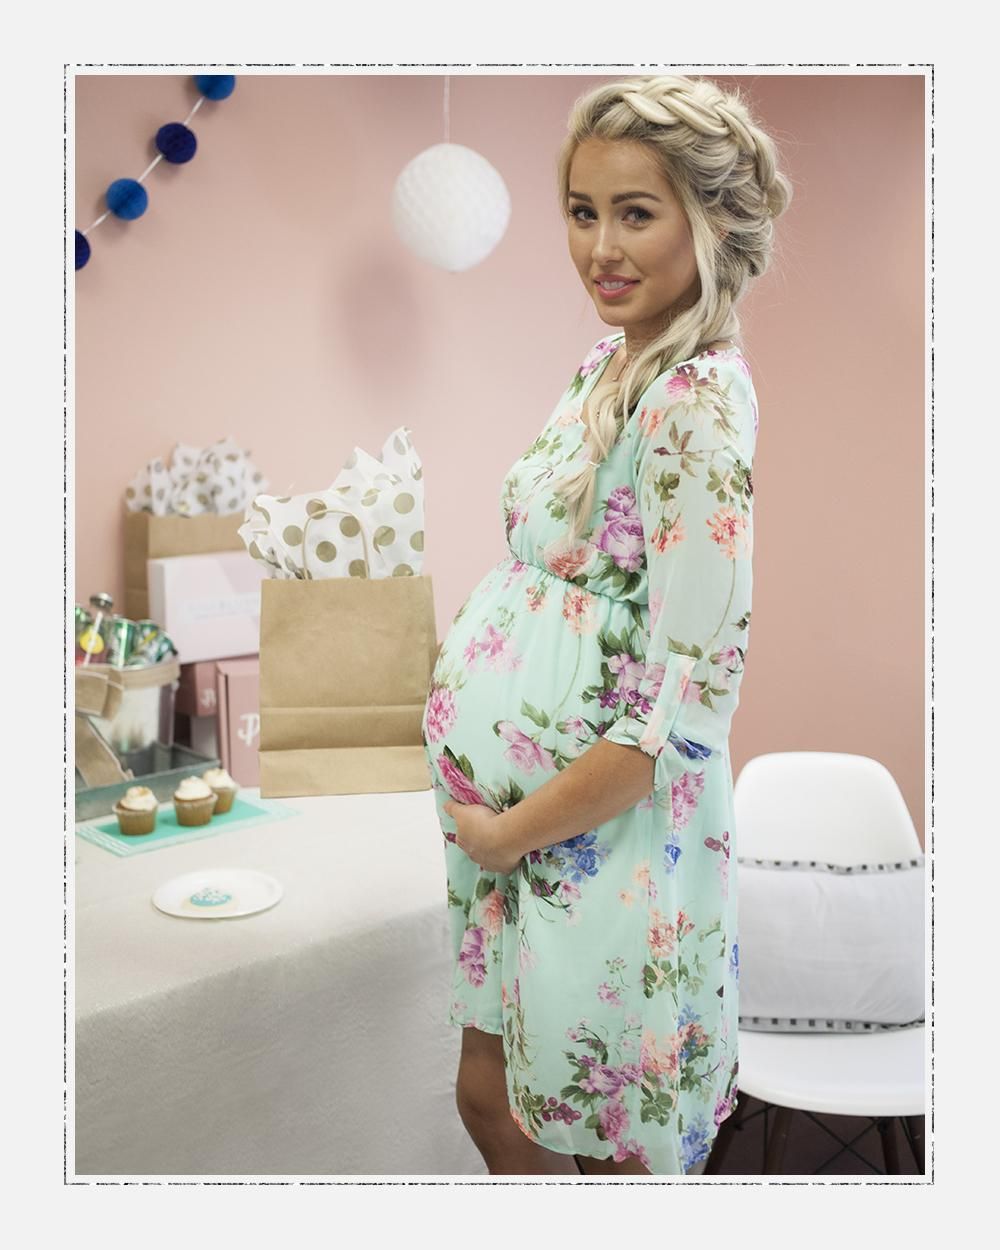 Full Size of Baby Shower:what Should I Wear To My Baby Shower Cute Baby Shower Outfits For Mom Stylish Maternity Dresses For Baby Shower Maternity Clothes Target Maternity Gown Style Maternity Stores Near Me Plus Size Maternity Clothes Cheap Maternity Jeans